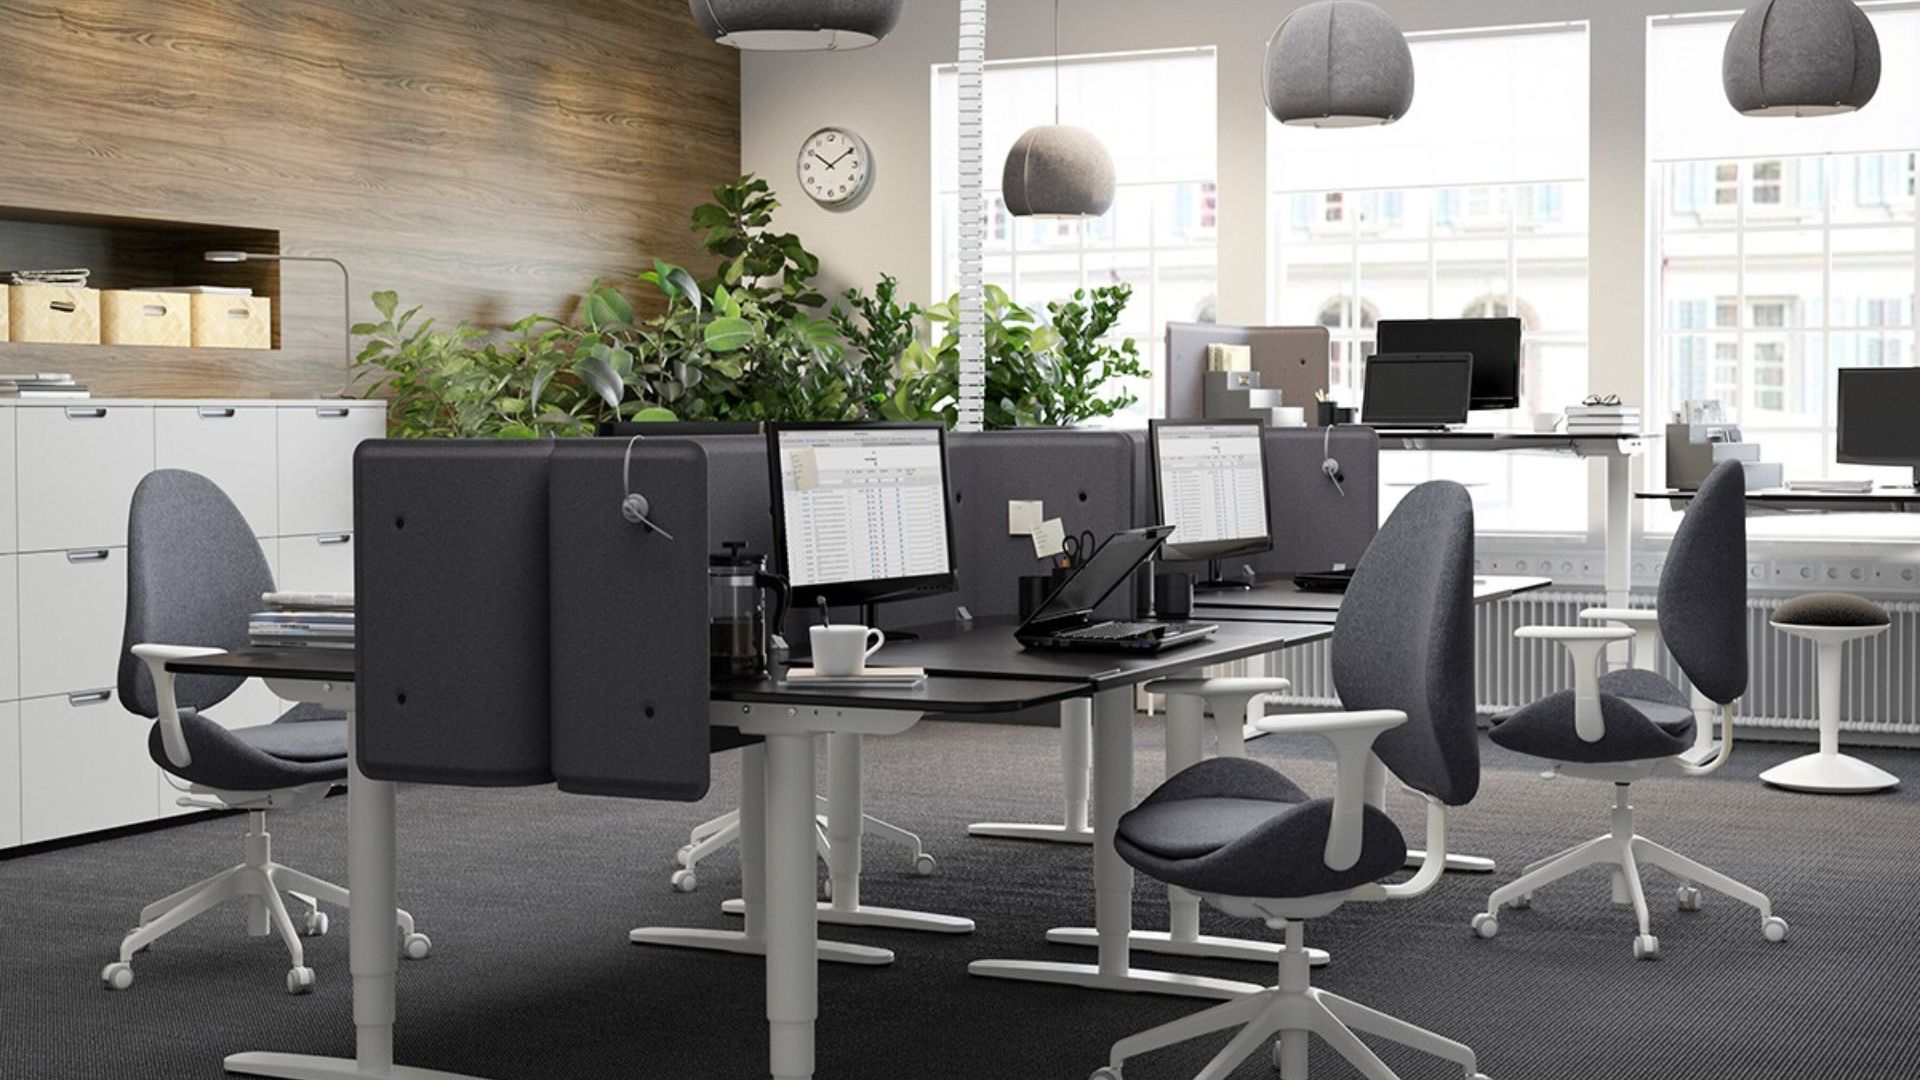 How to Sеlеct Thе Bеst Luxury Officе Furniturе for Your Workspacе?